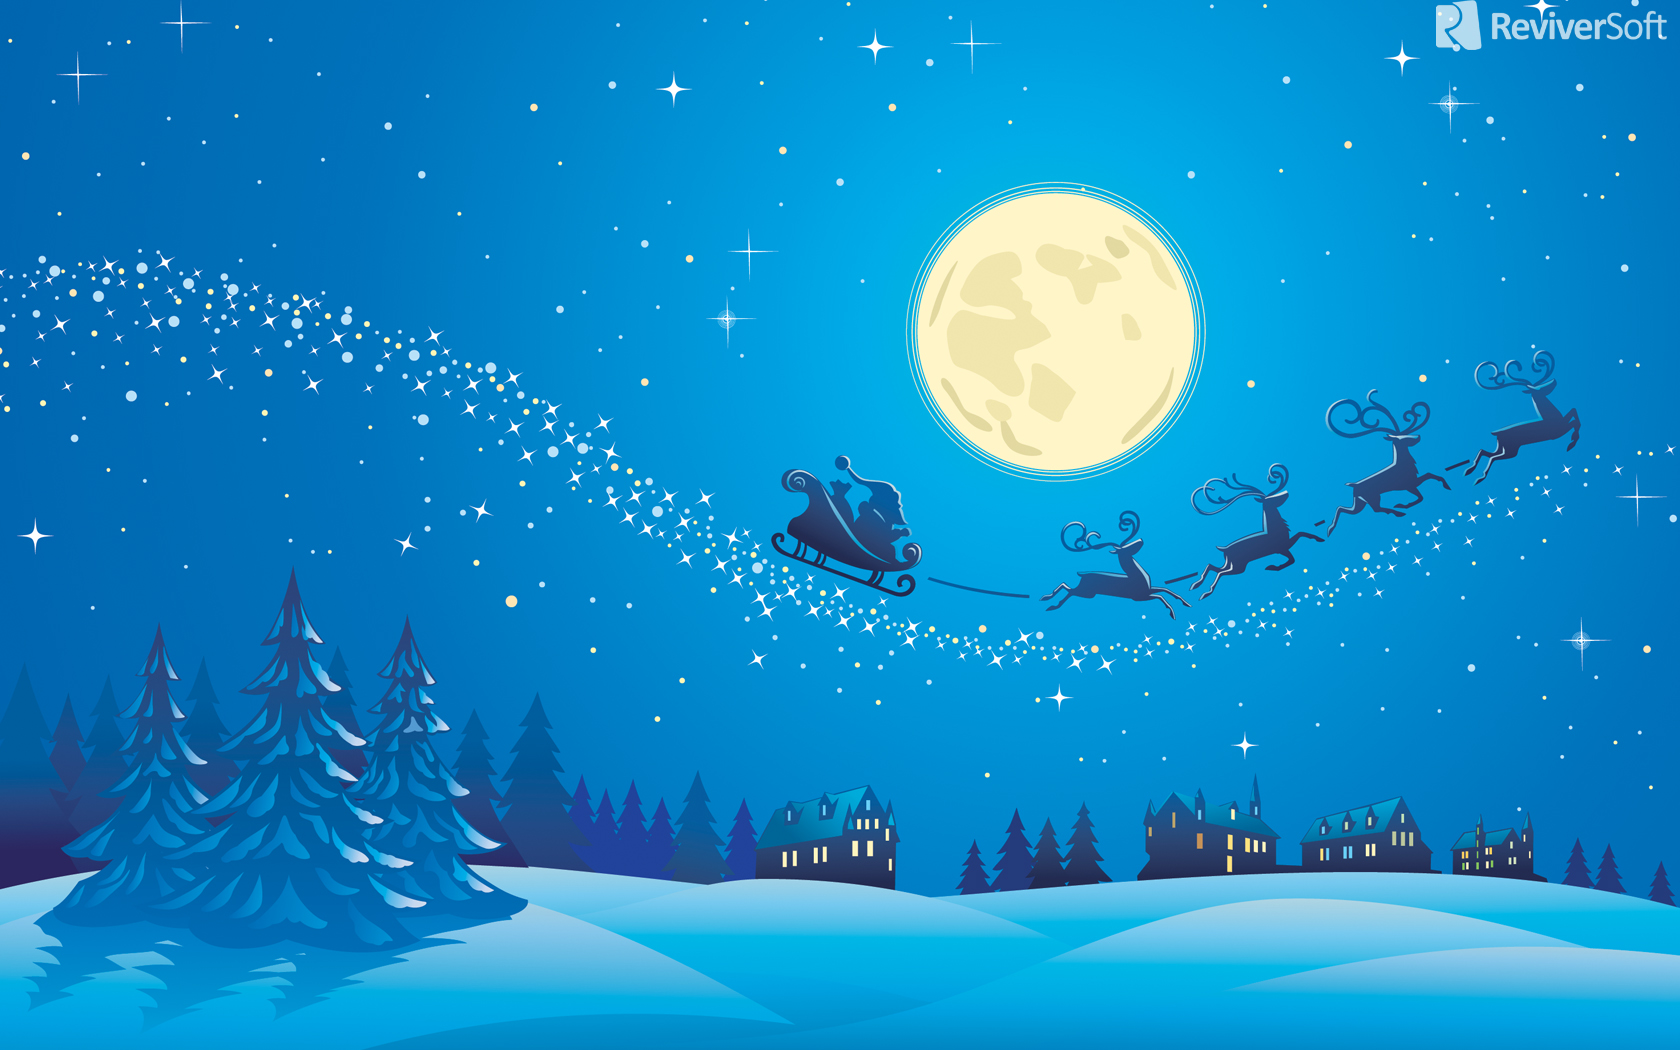 Where can I find holiday themes and wallpaper for Windows 8 & earlier?